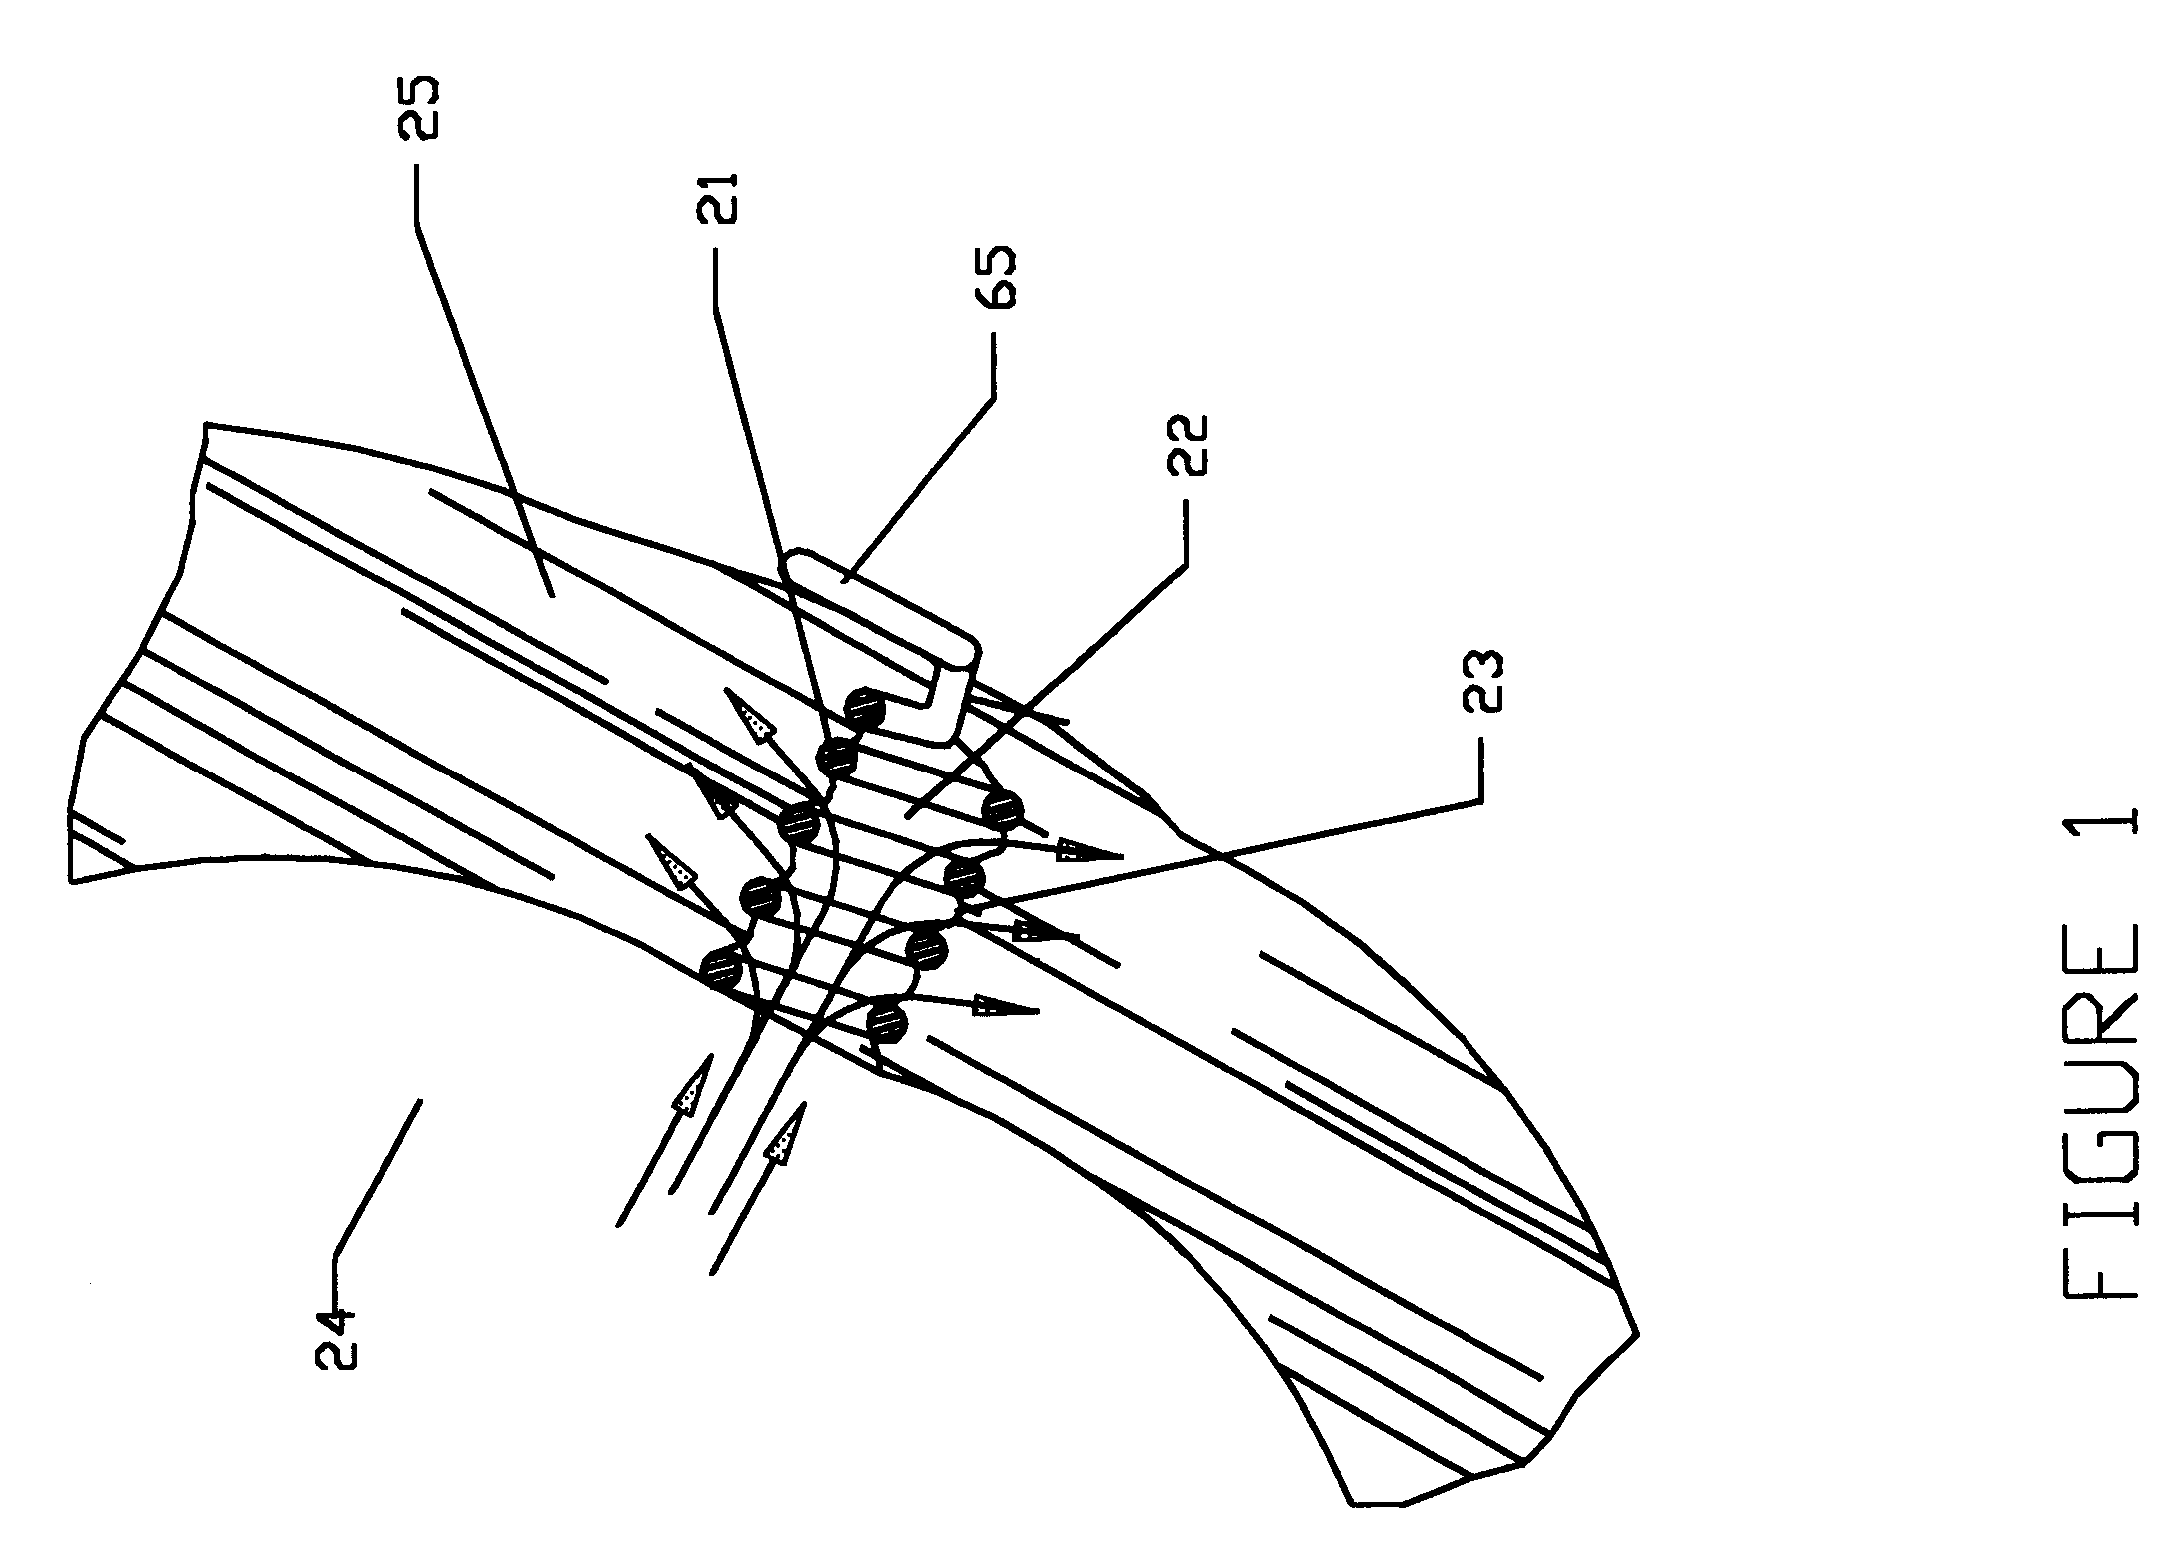 Implant device for trans myocardial revascularization